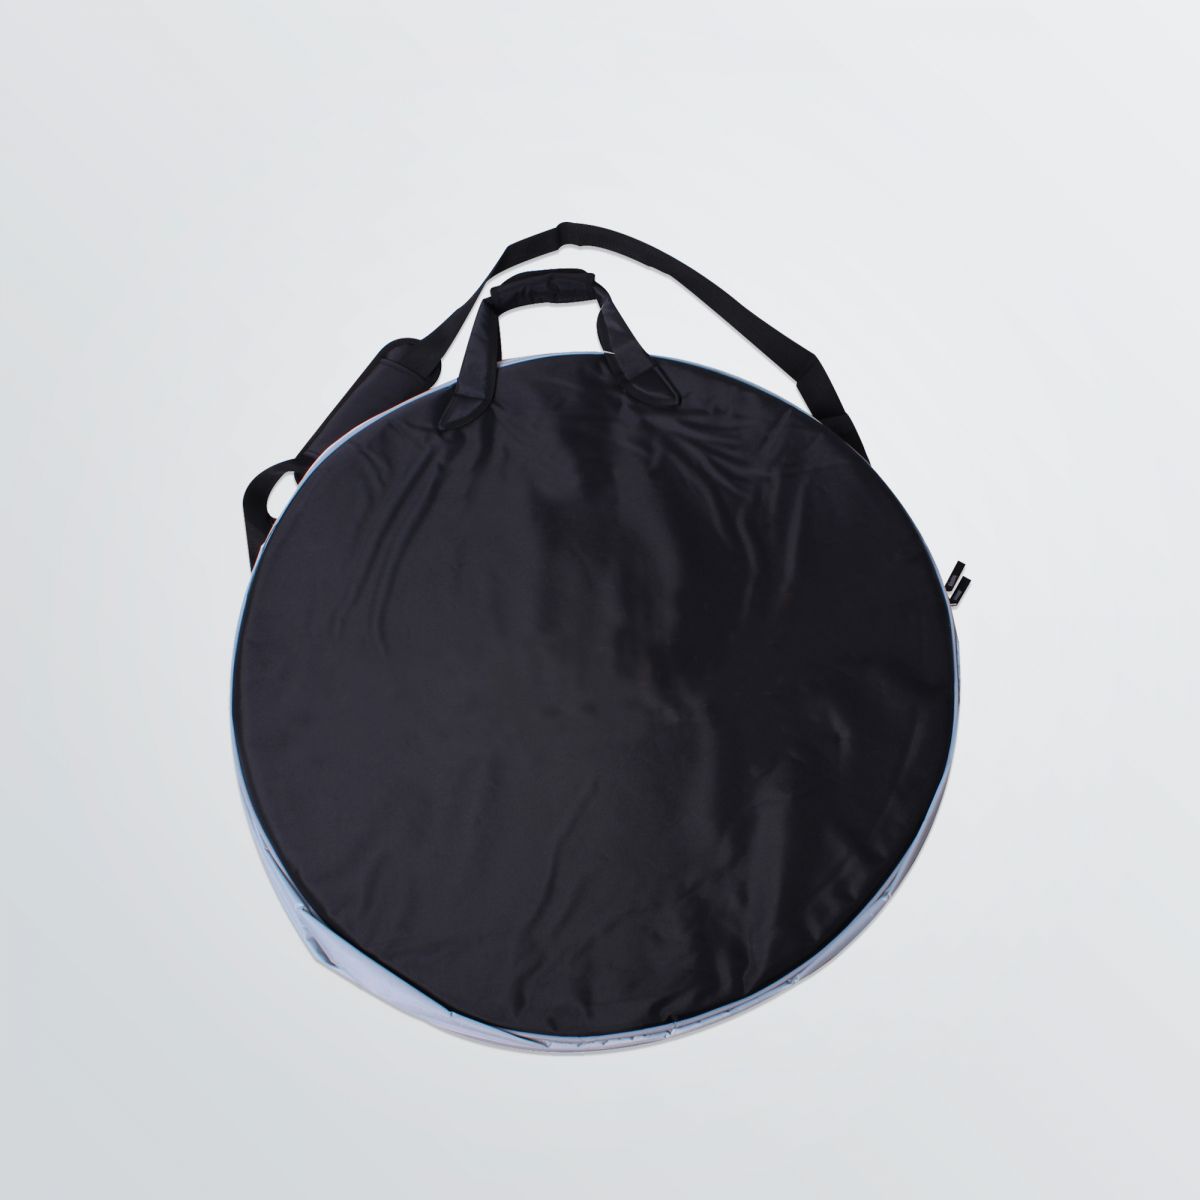 printable protect wheelbag in black colour inklusive carrying handle 